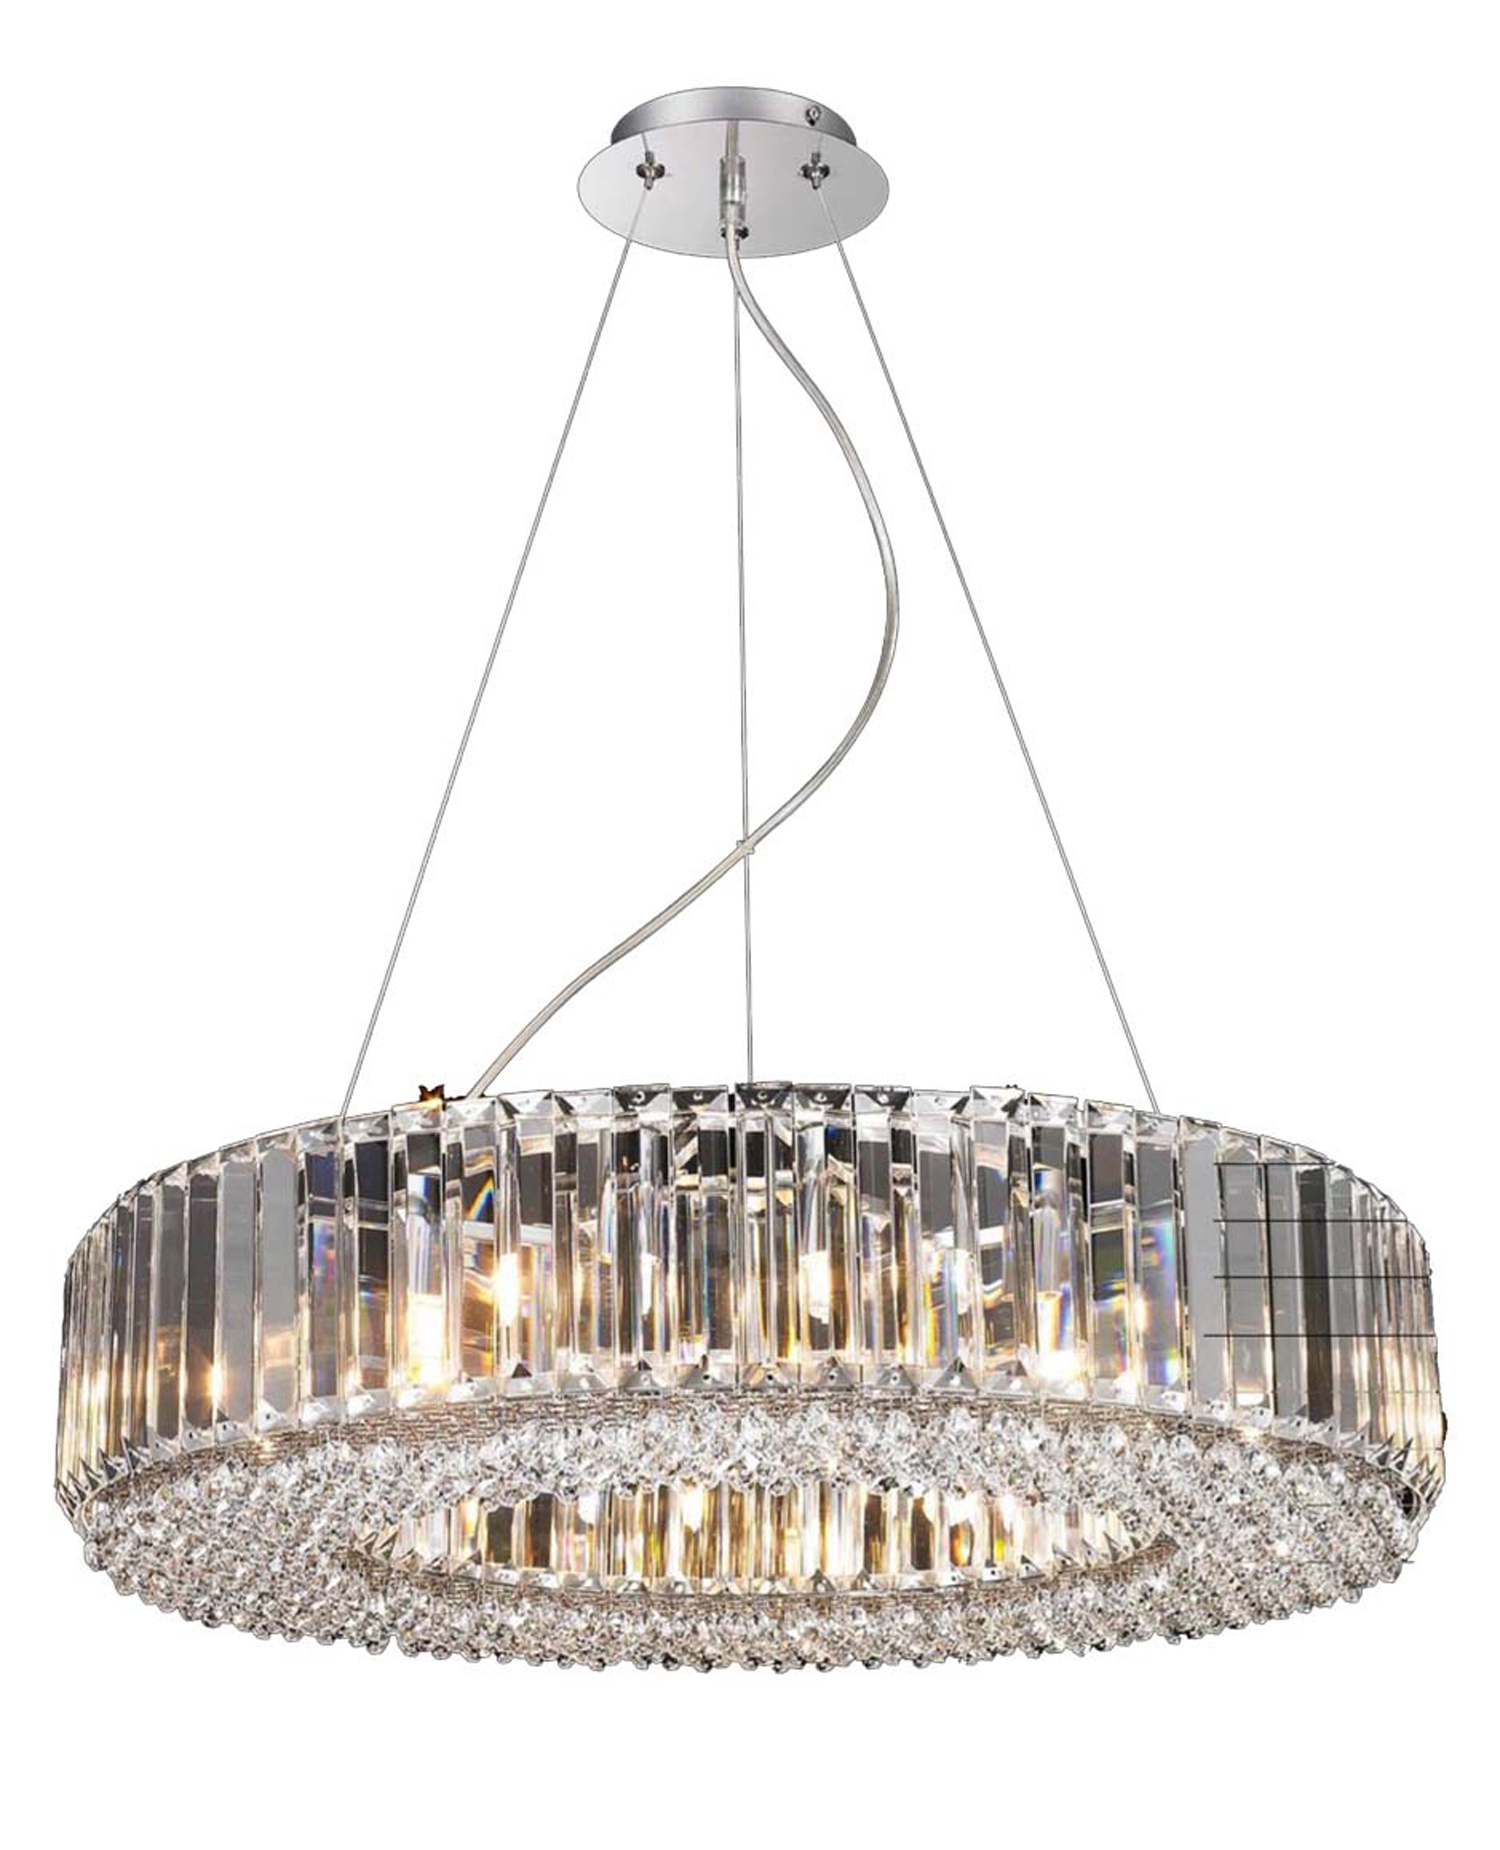 Luxe 12 Light Round Crystal Pendant, Round Crystal Pendant